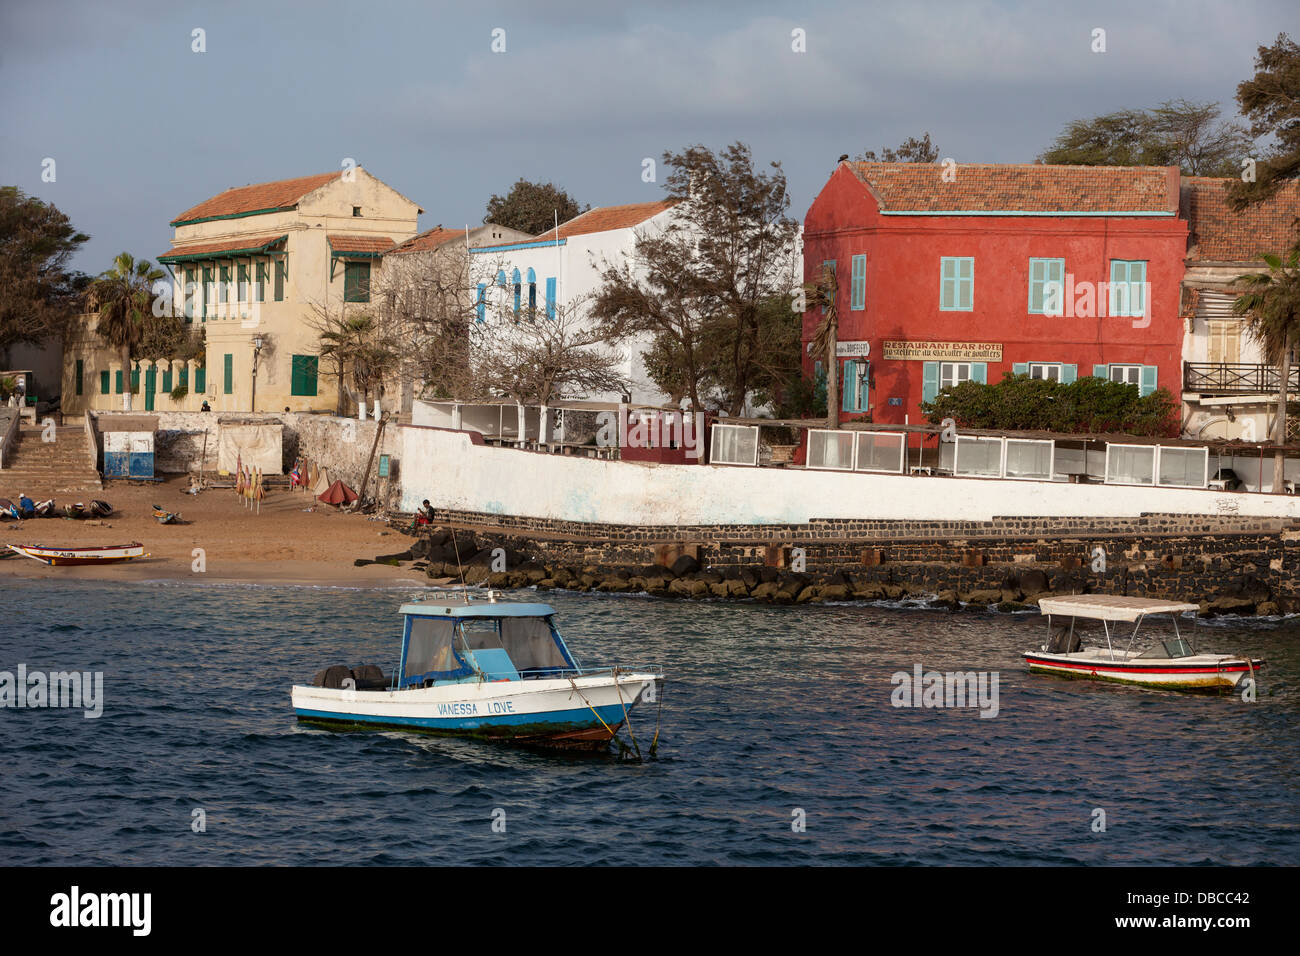 Houses on Goree Island Waterfront, Senegal. Hostellerie du Chevalier de Boufflers (red building), a small hotel, on the right. Stock Photo